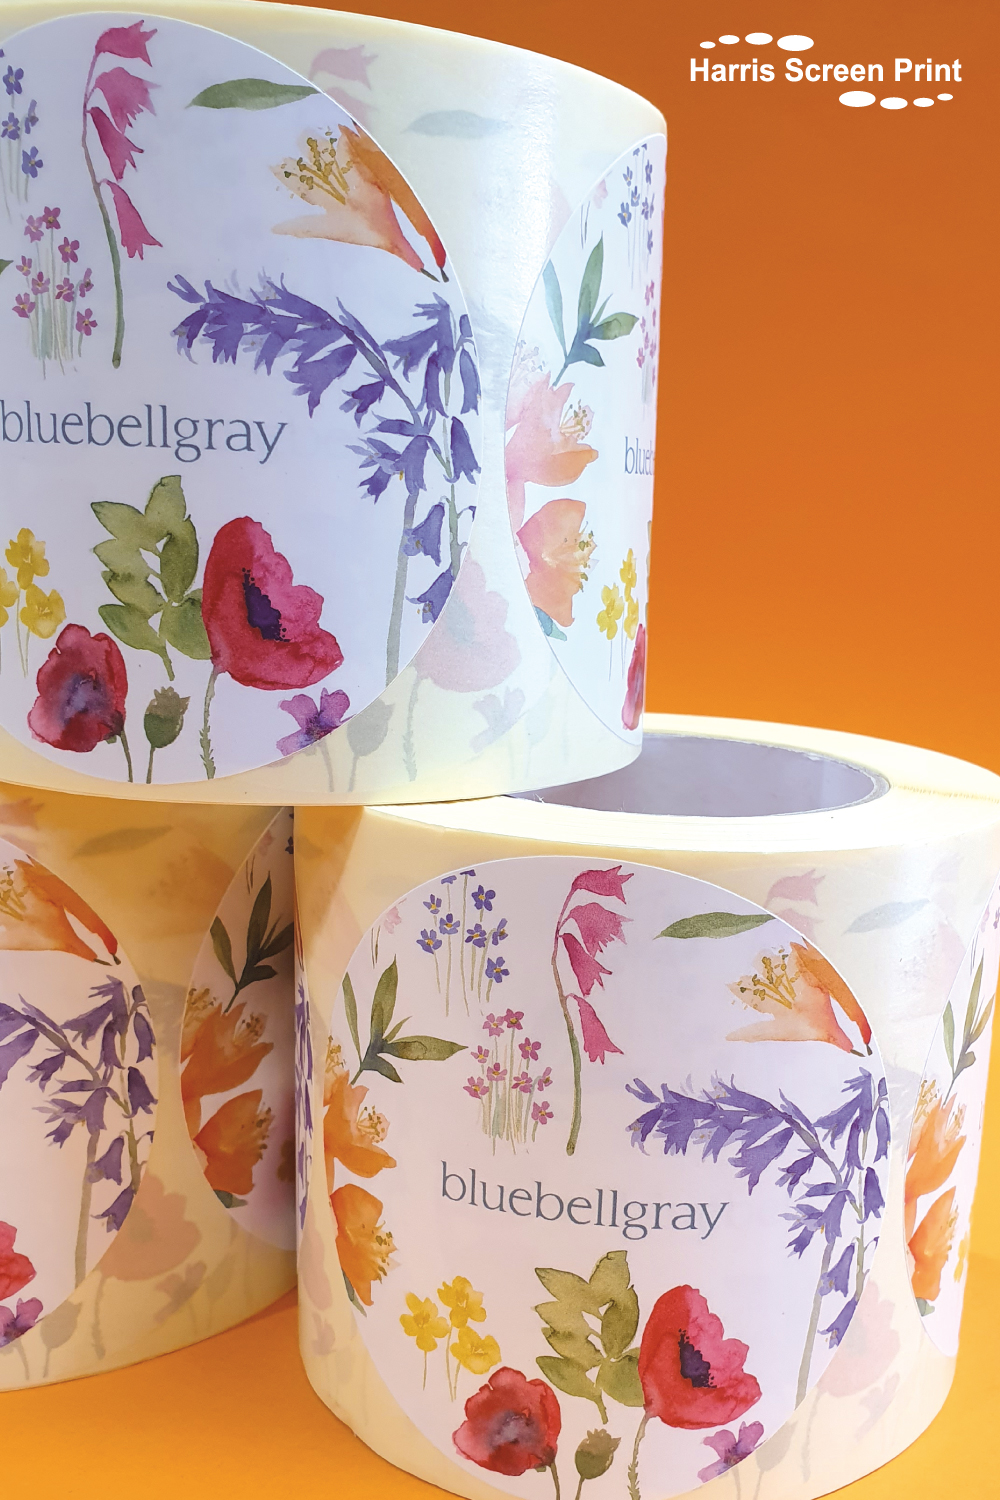 Rolls of labels printed for Bluebell Gray